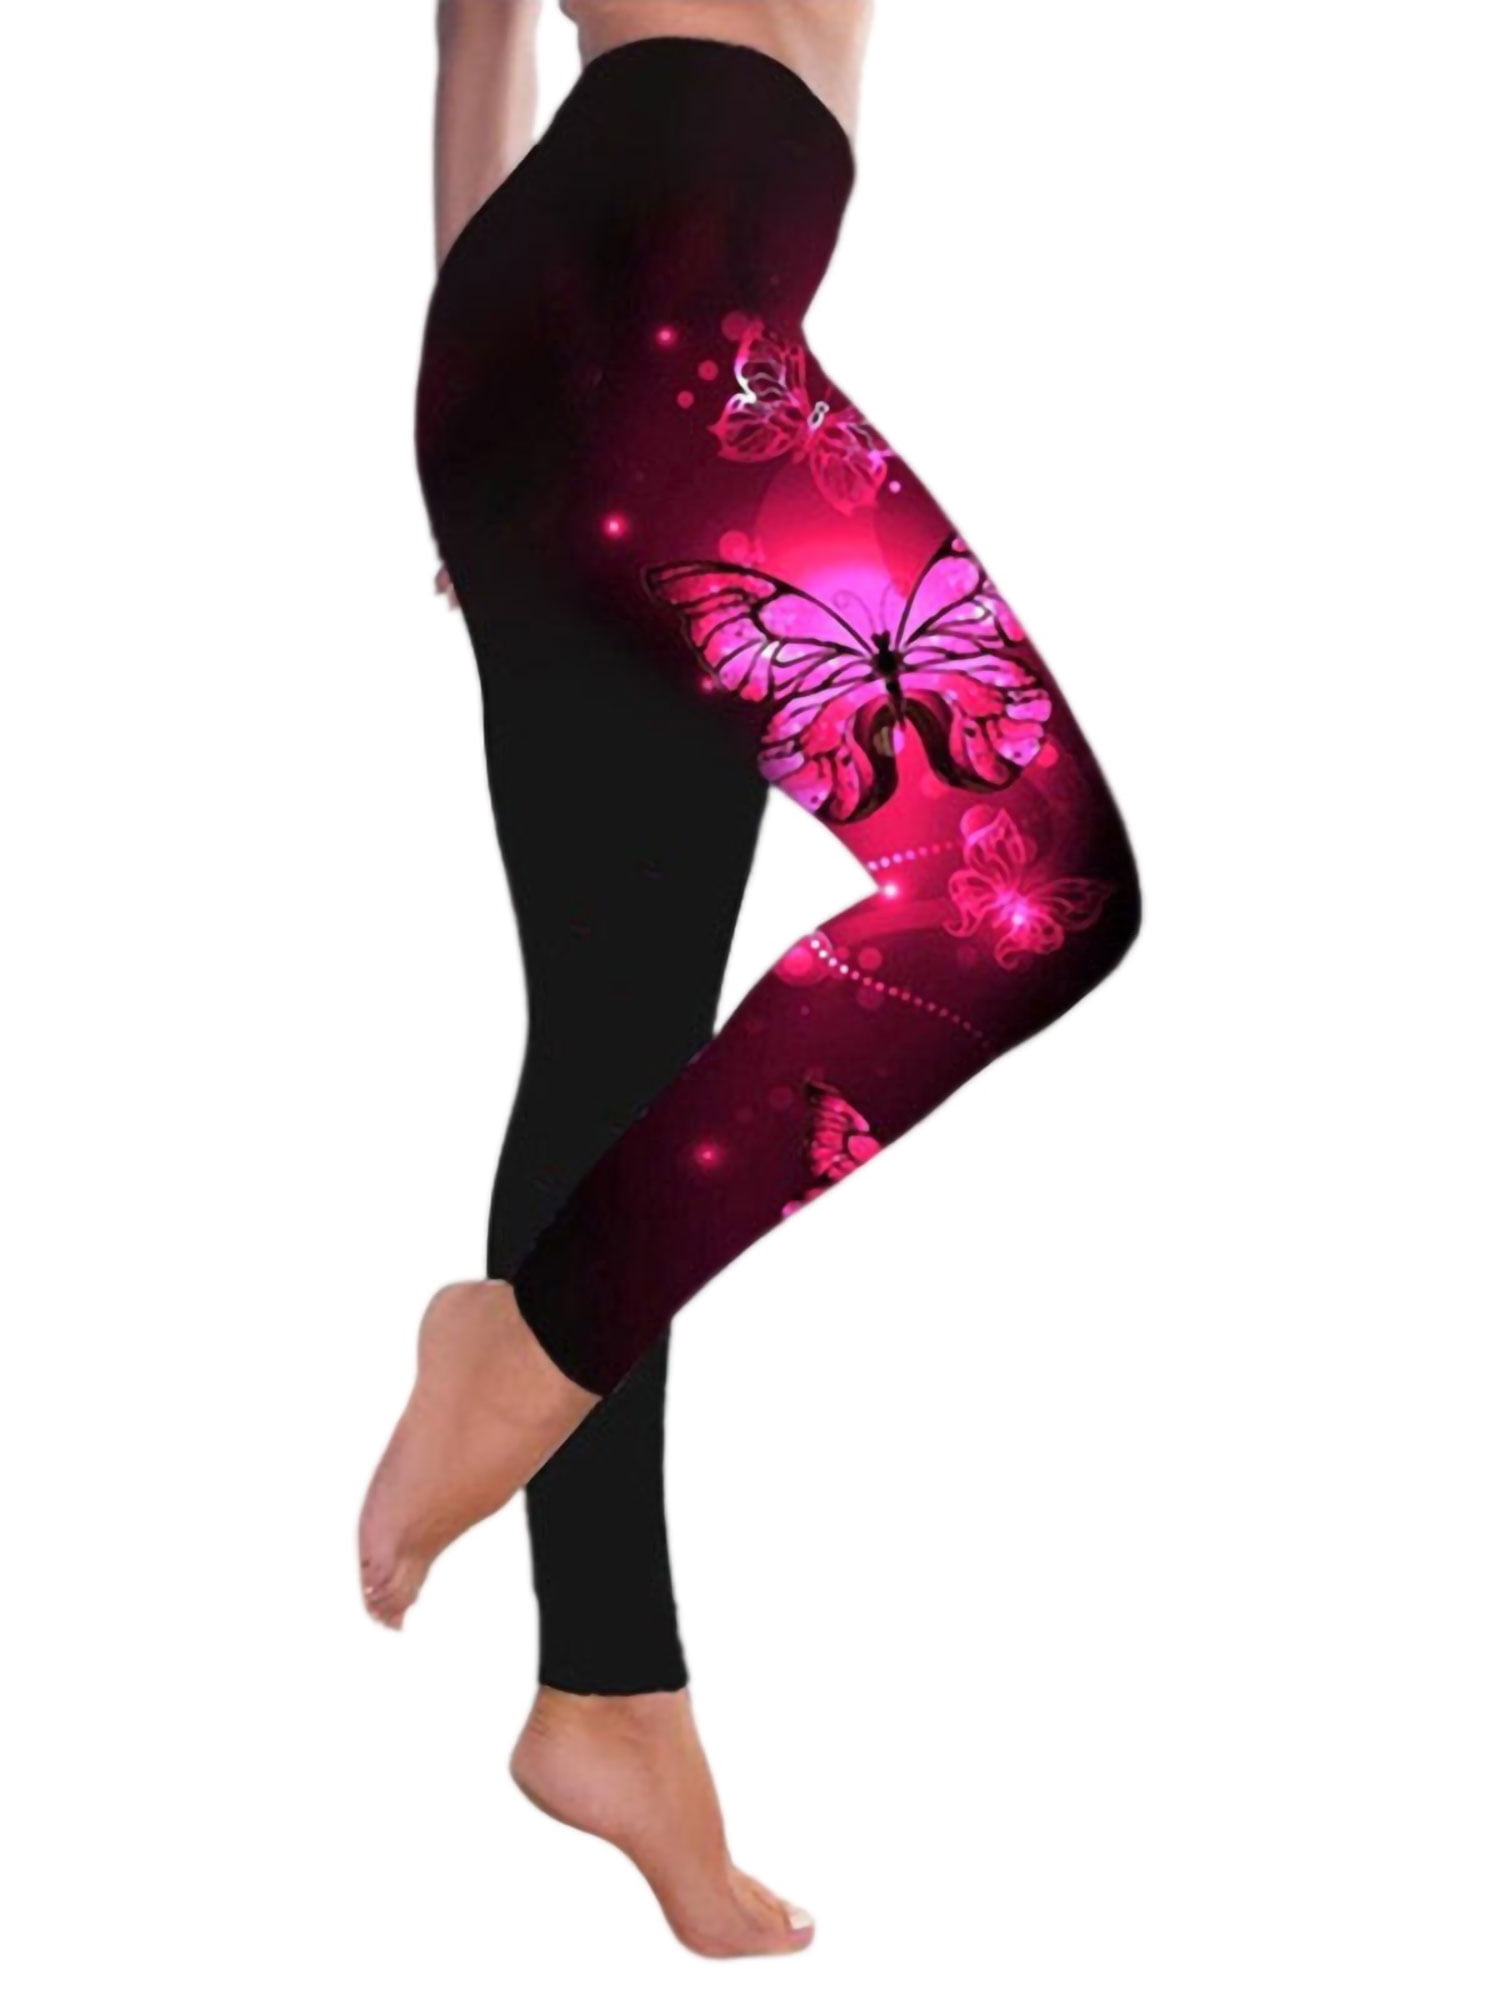 FLYILY Women's Long Yoga Pants Sports Leggings Running Tights High Waist Stretch Fitness Trousers